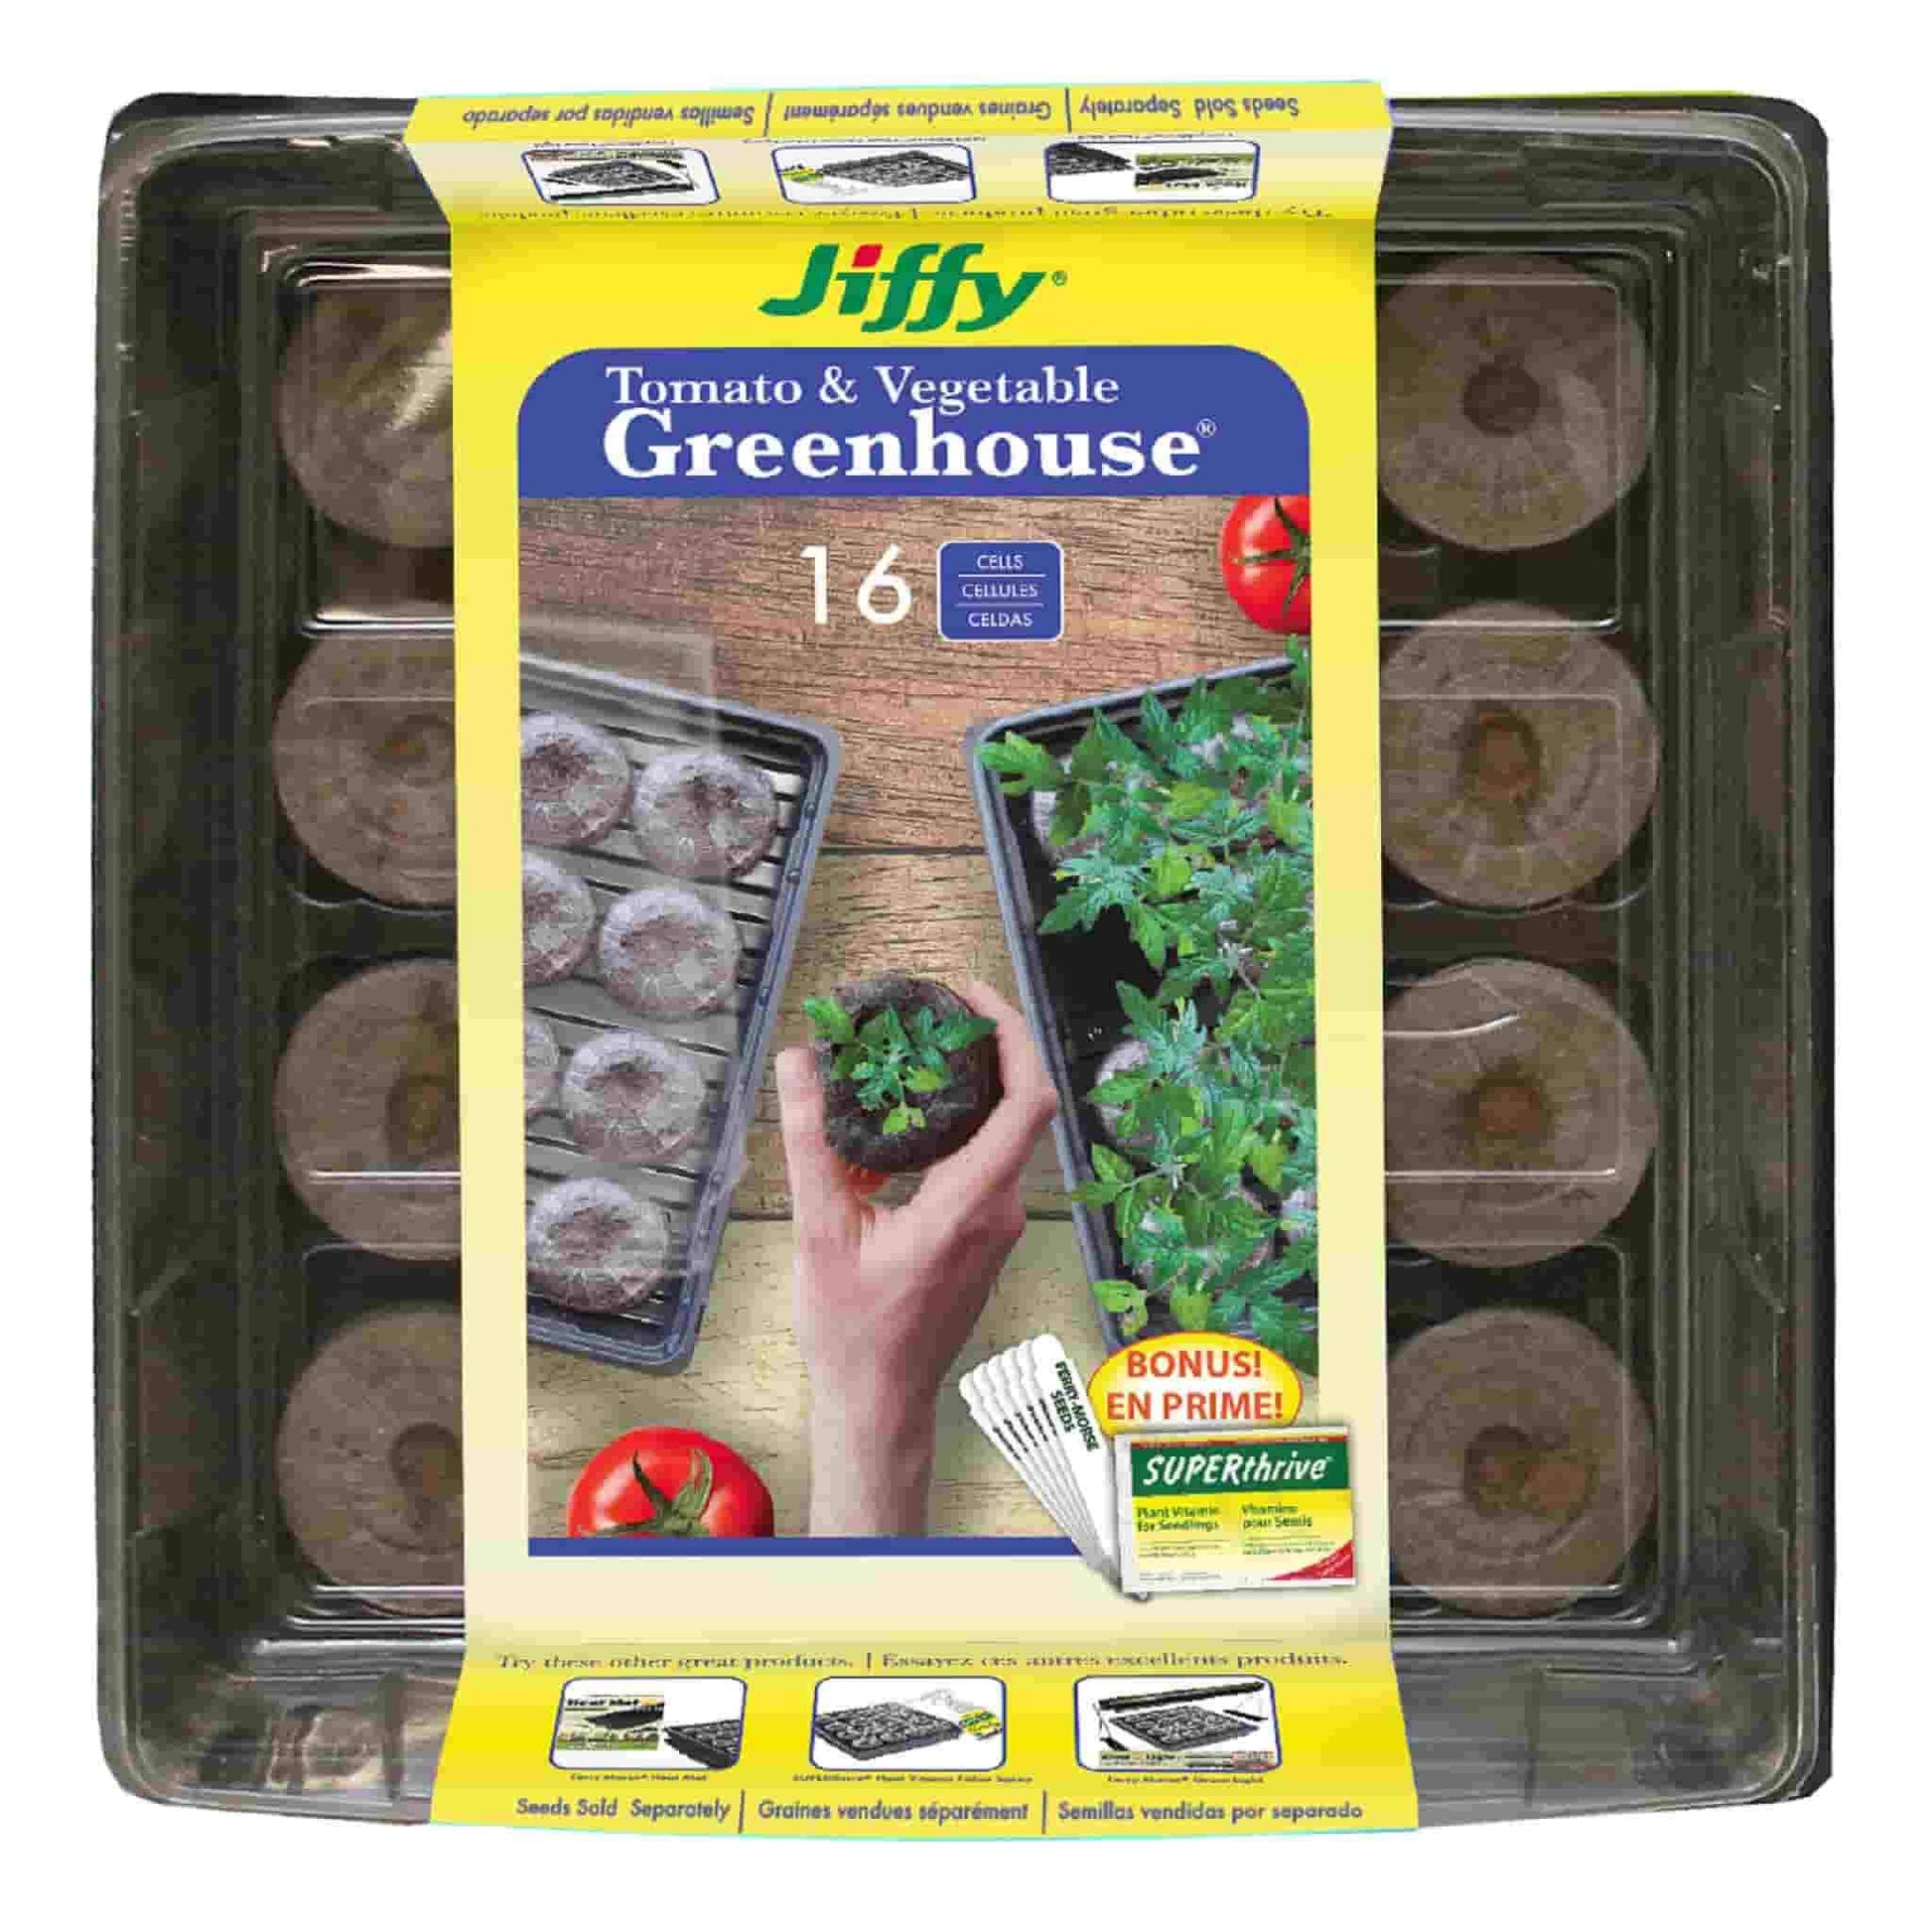 Jiffy 16 Pellet Tomato & Vegetable Greenhouse with SUPERthrive